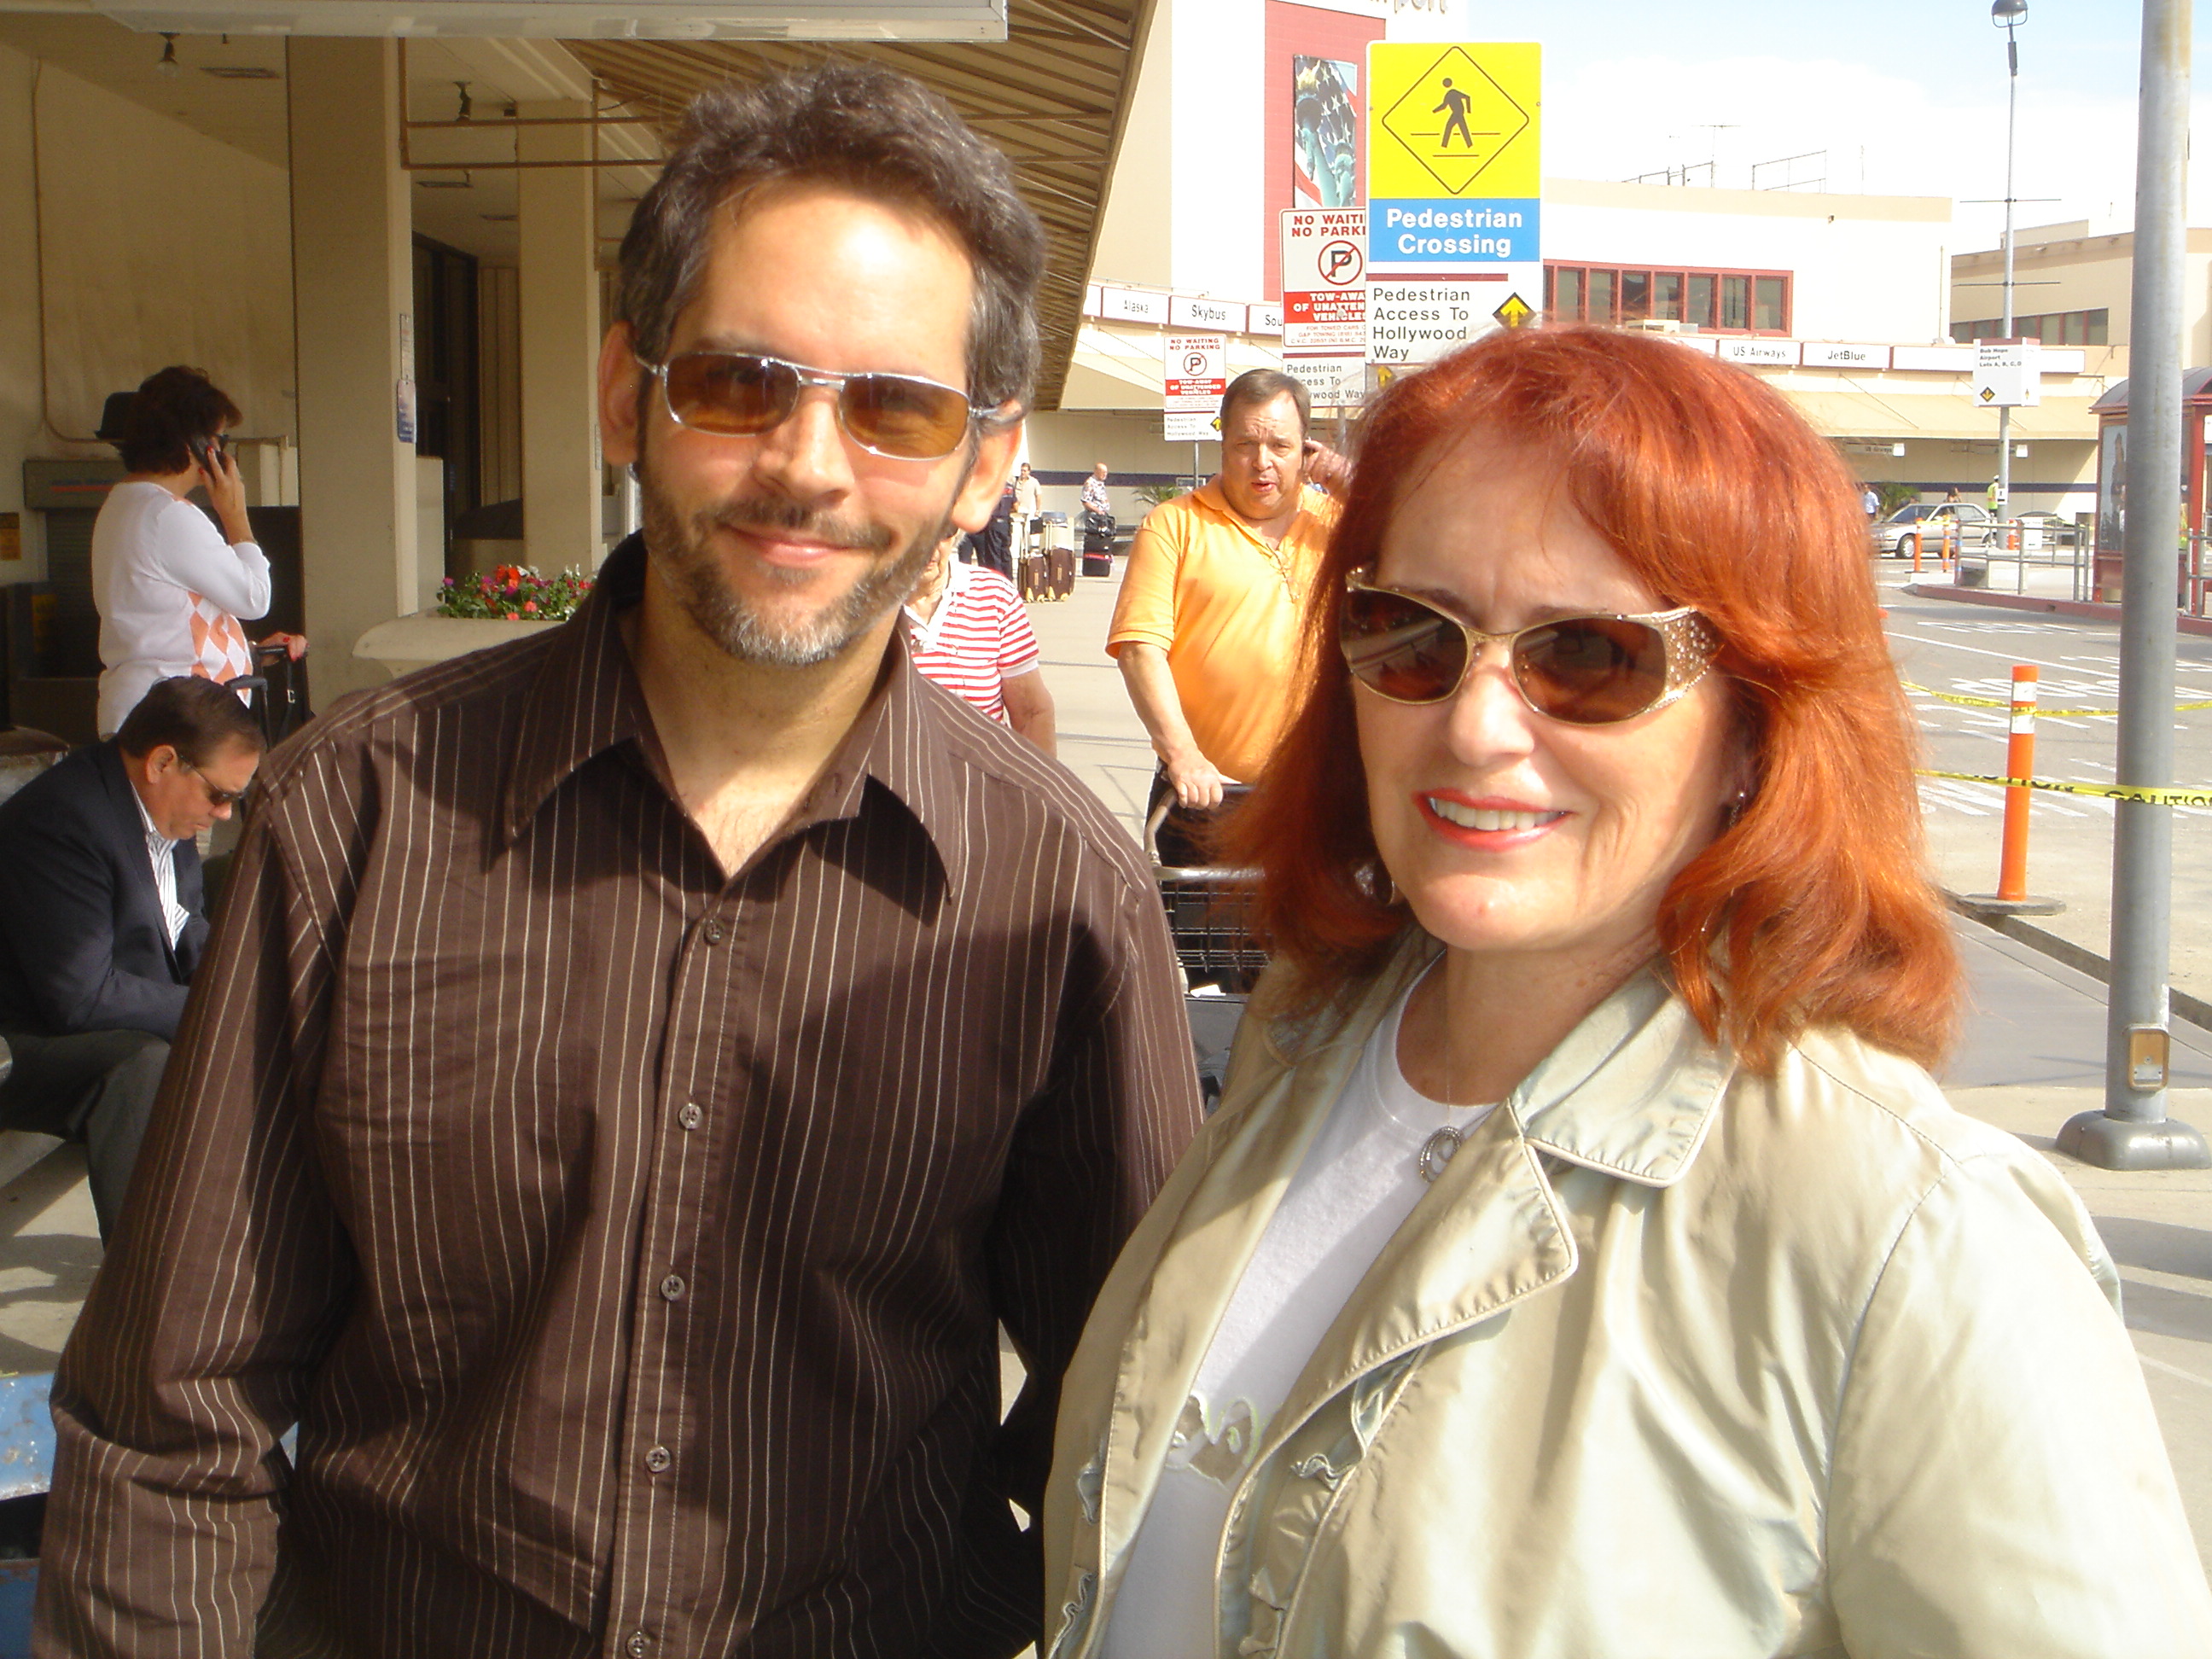 Lance Brittan and Joanna M. Champlin arriving in Los Angeles for a recording session